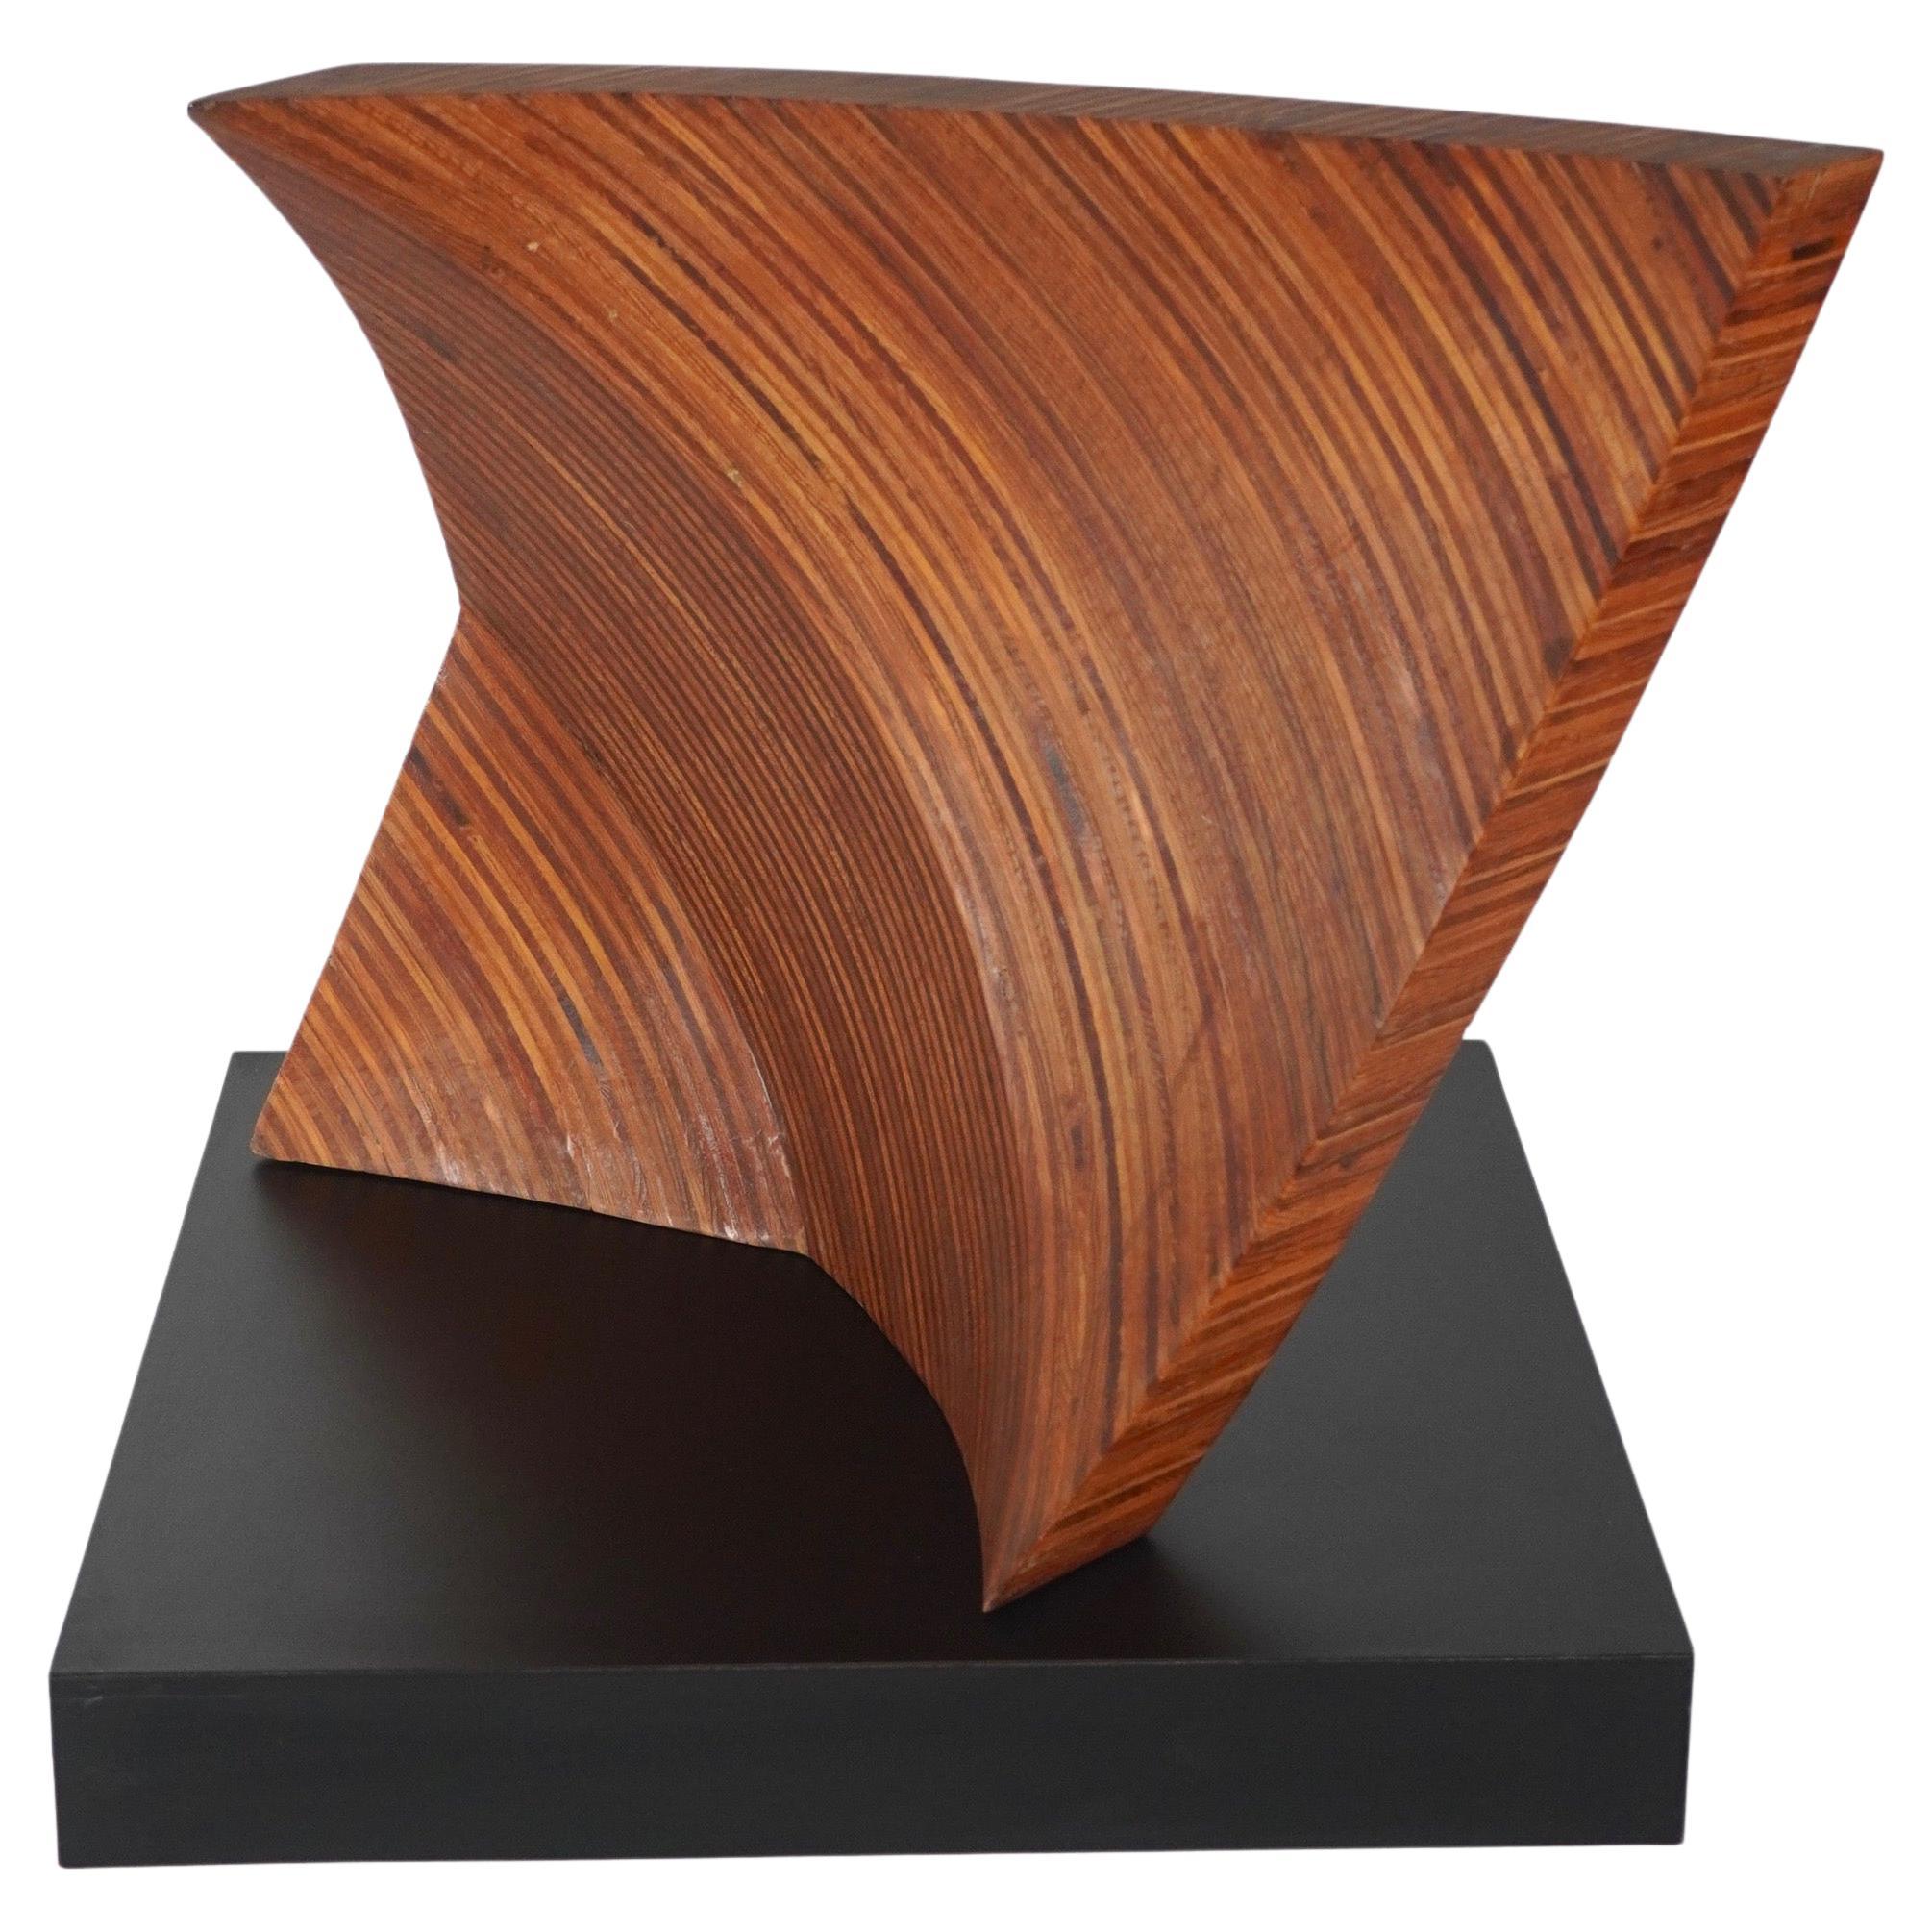 Modernist Abstract Hand Carved Wooden Sculpture, circa 1970s